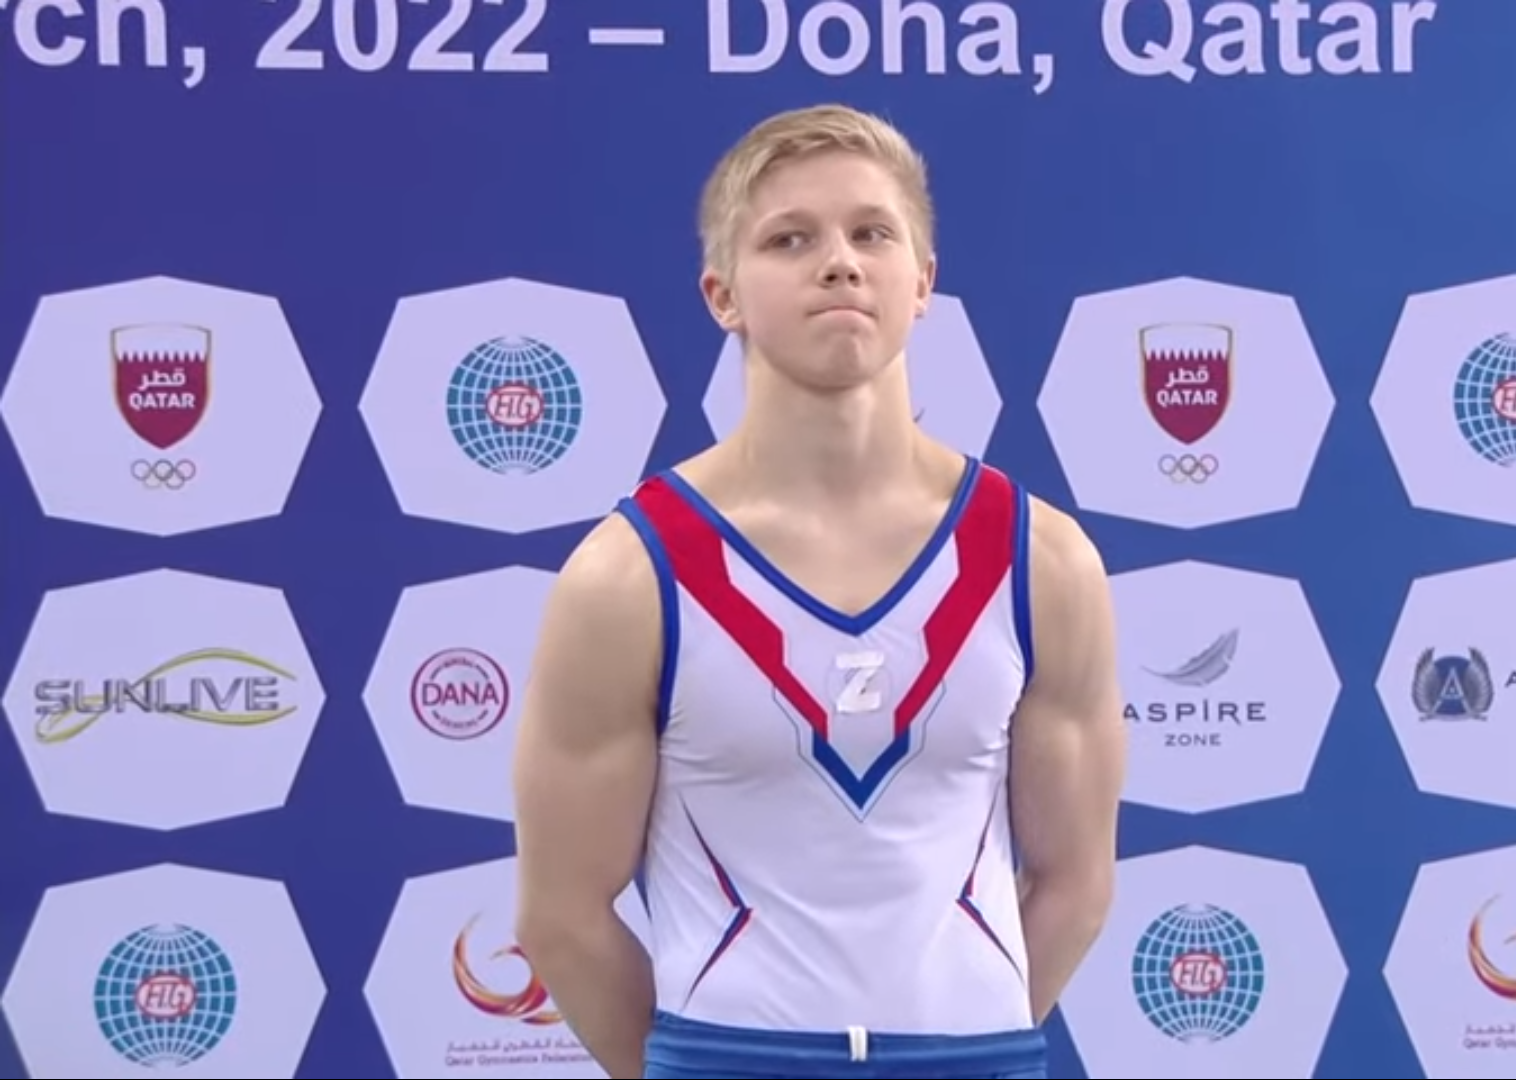 Russian gymnast Ivan Kuliak is unrepentant over wearing a symbol in support of the invasion of Ukraine on the podium following a World Cup event in Doha on Saturday ©Getty Images